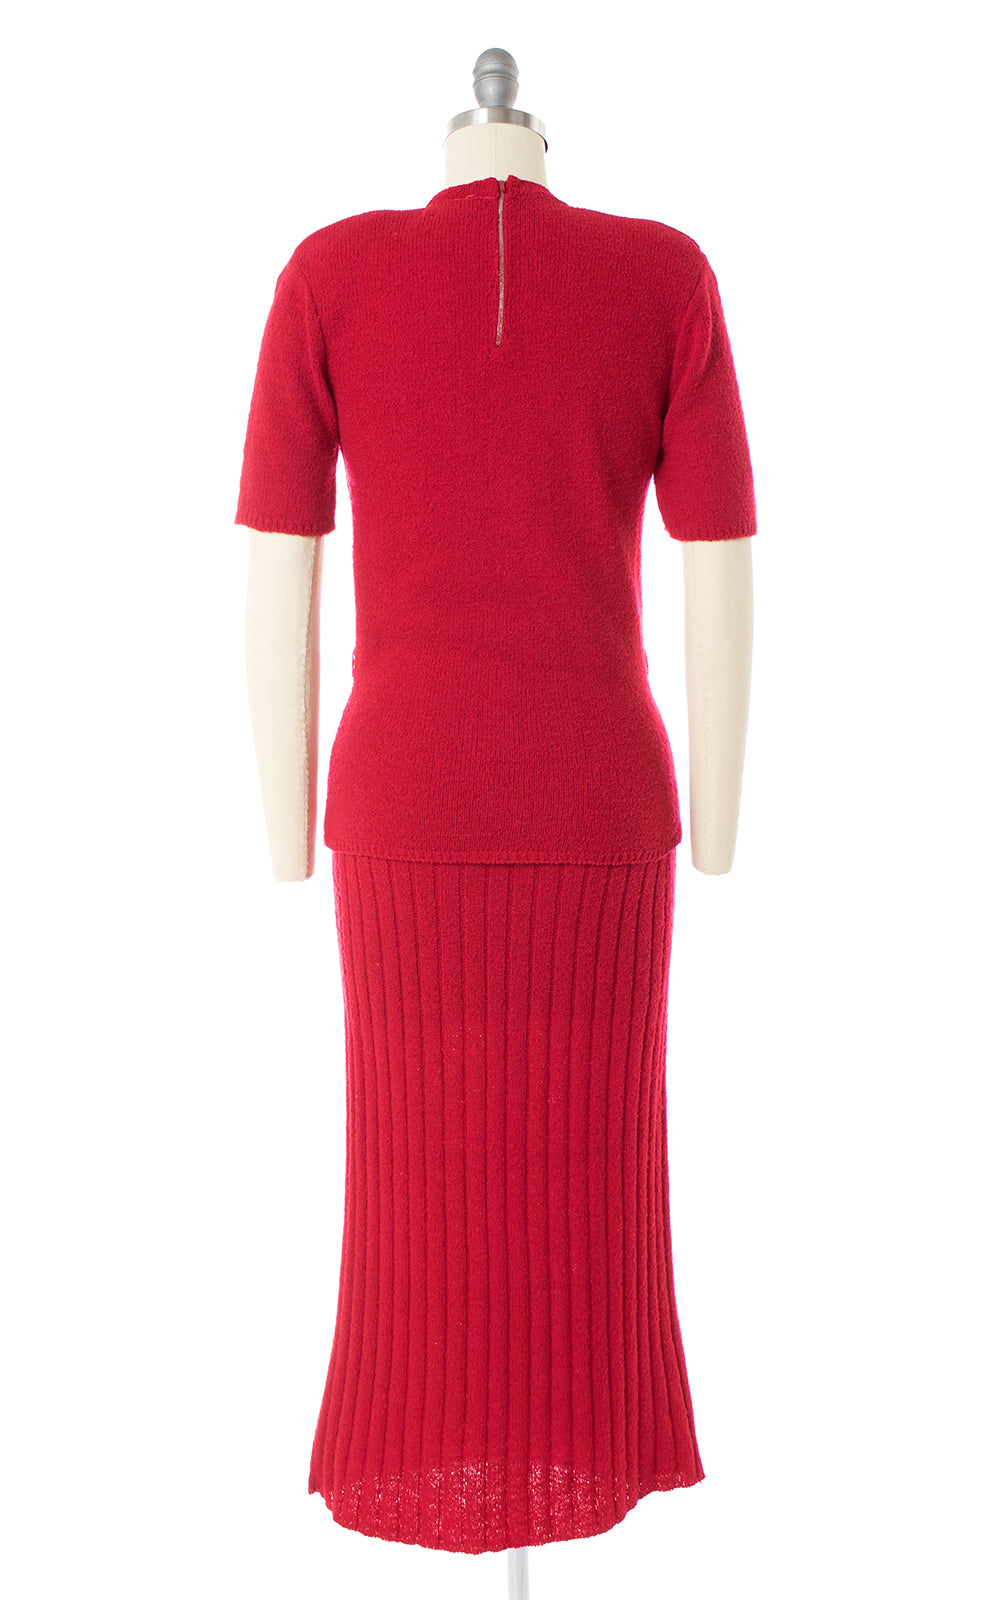 1940s 1950s Bright Red Knit Wool Sweater & Skirt Set